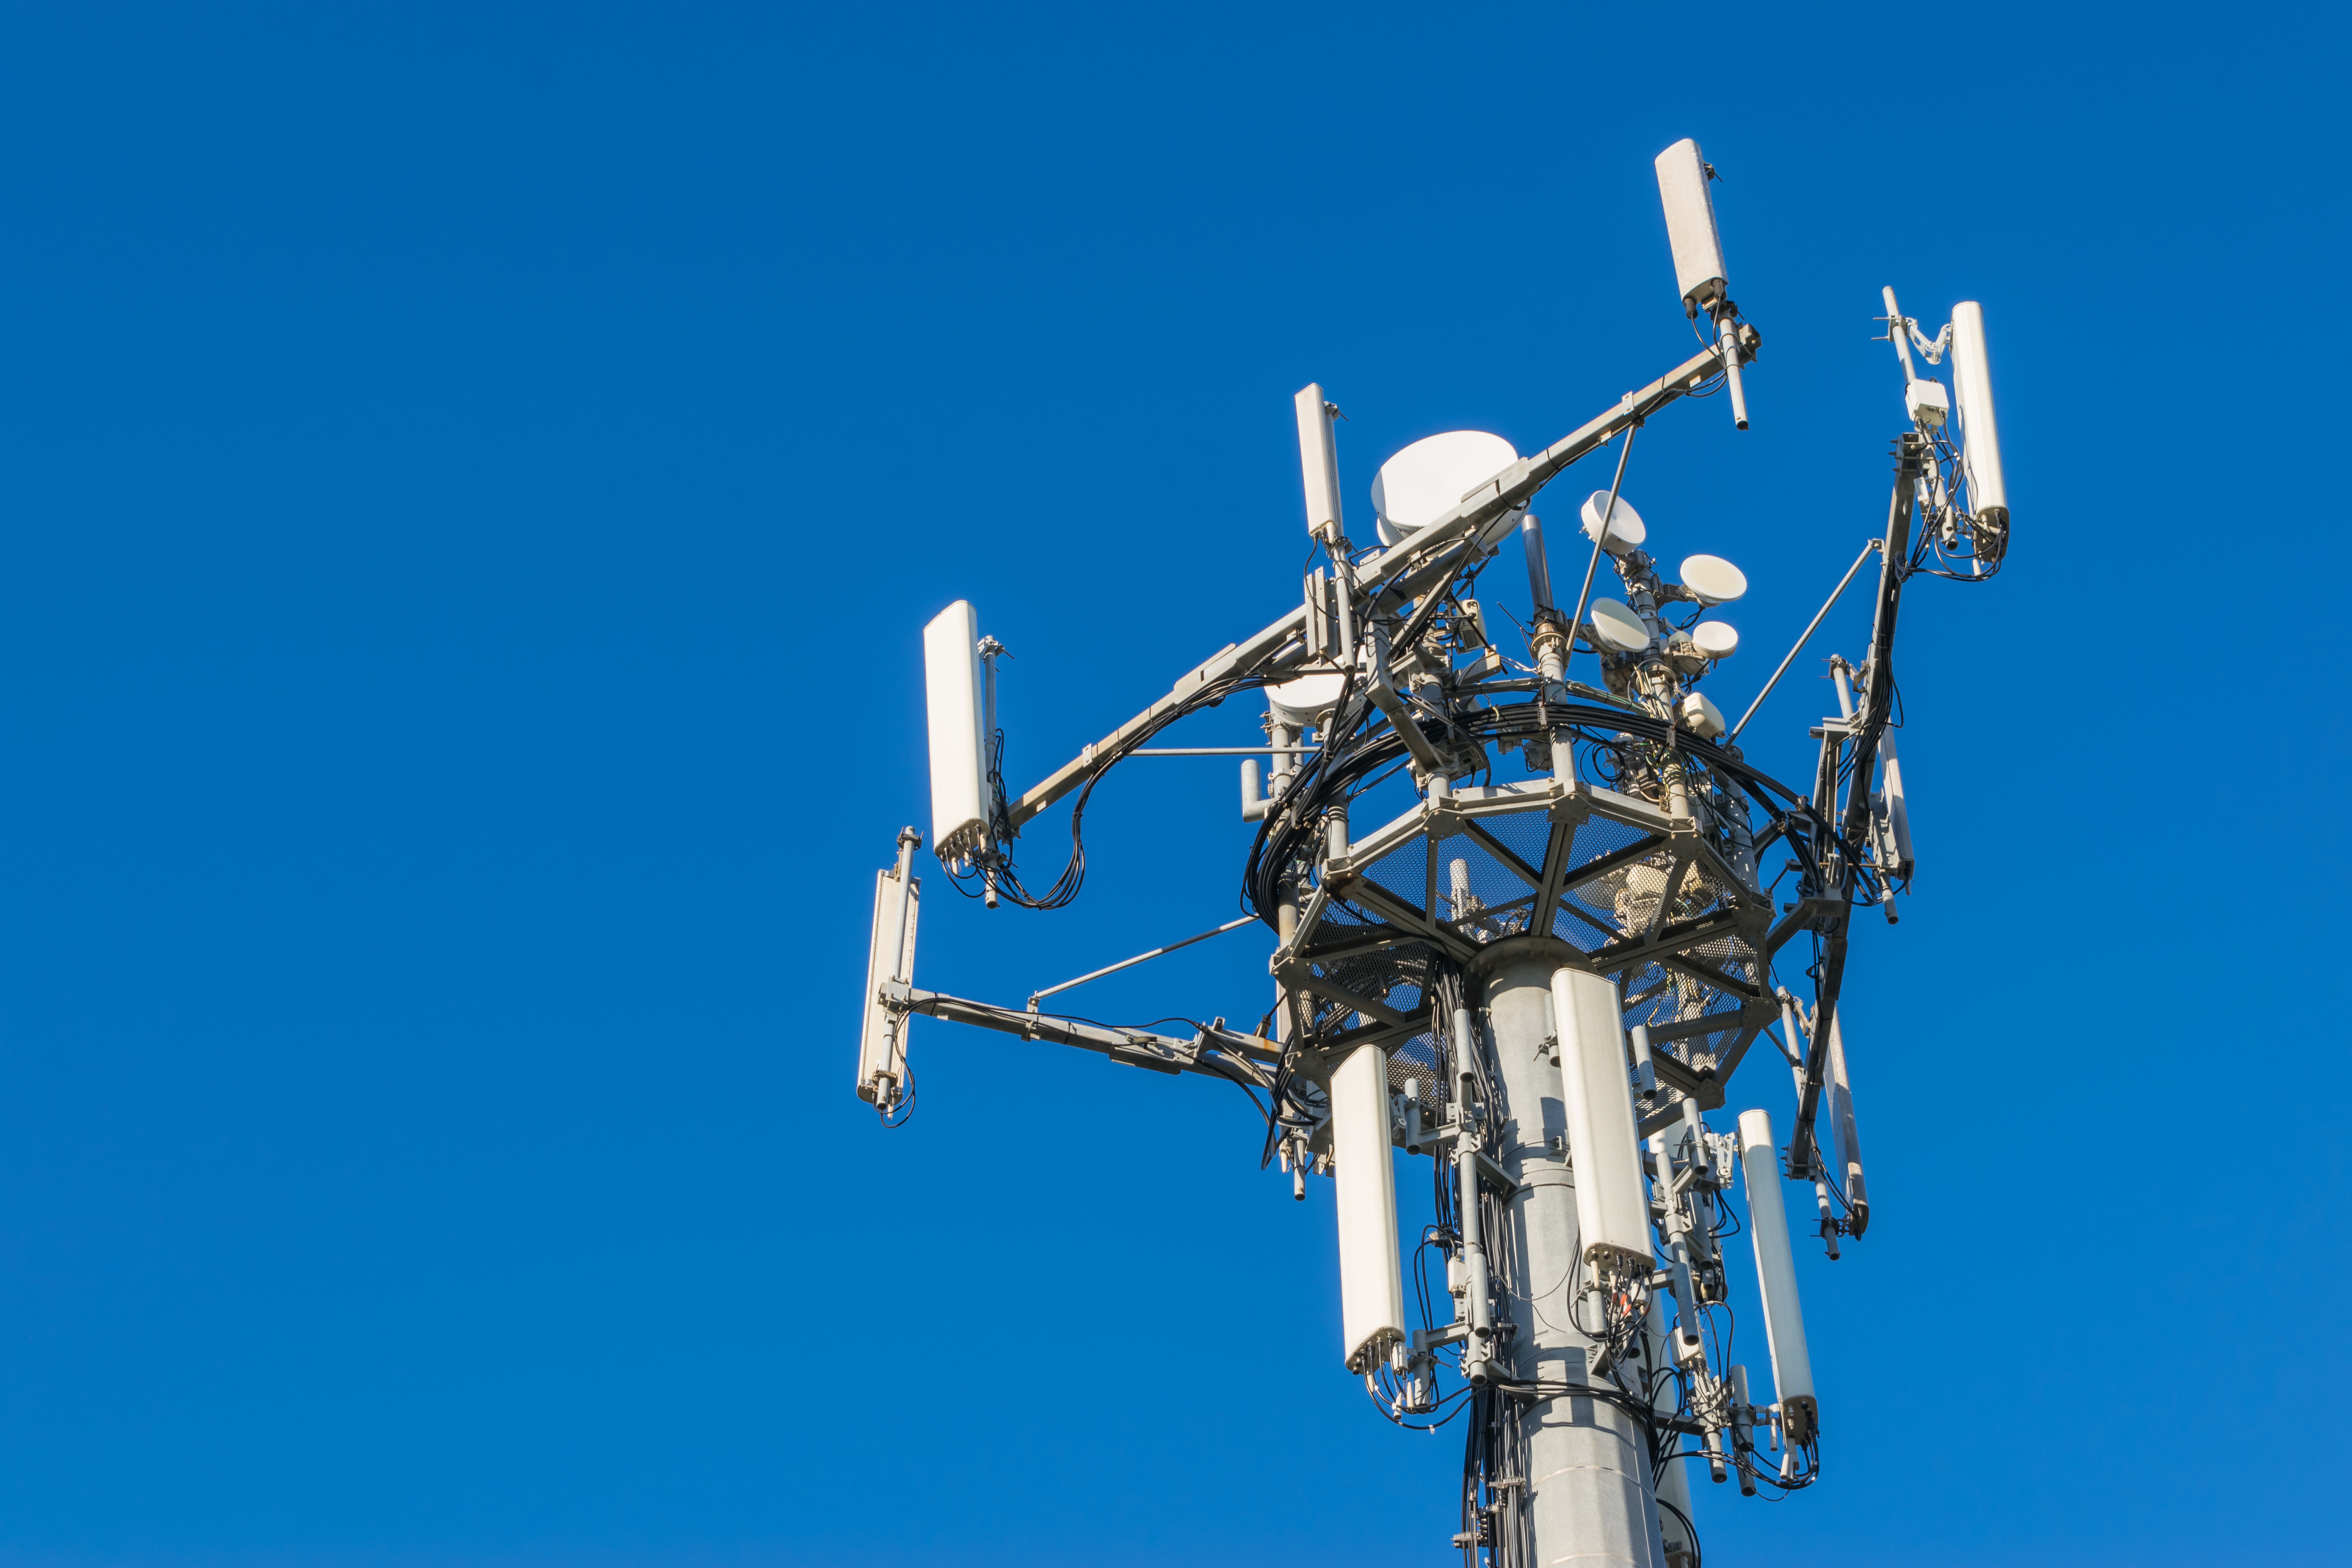 The forum will help resolve issues relating to rents for mobile phone masts.